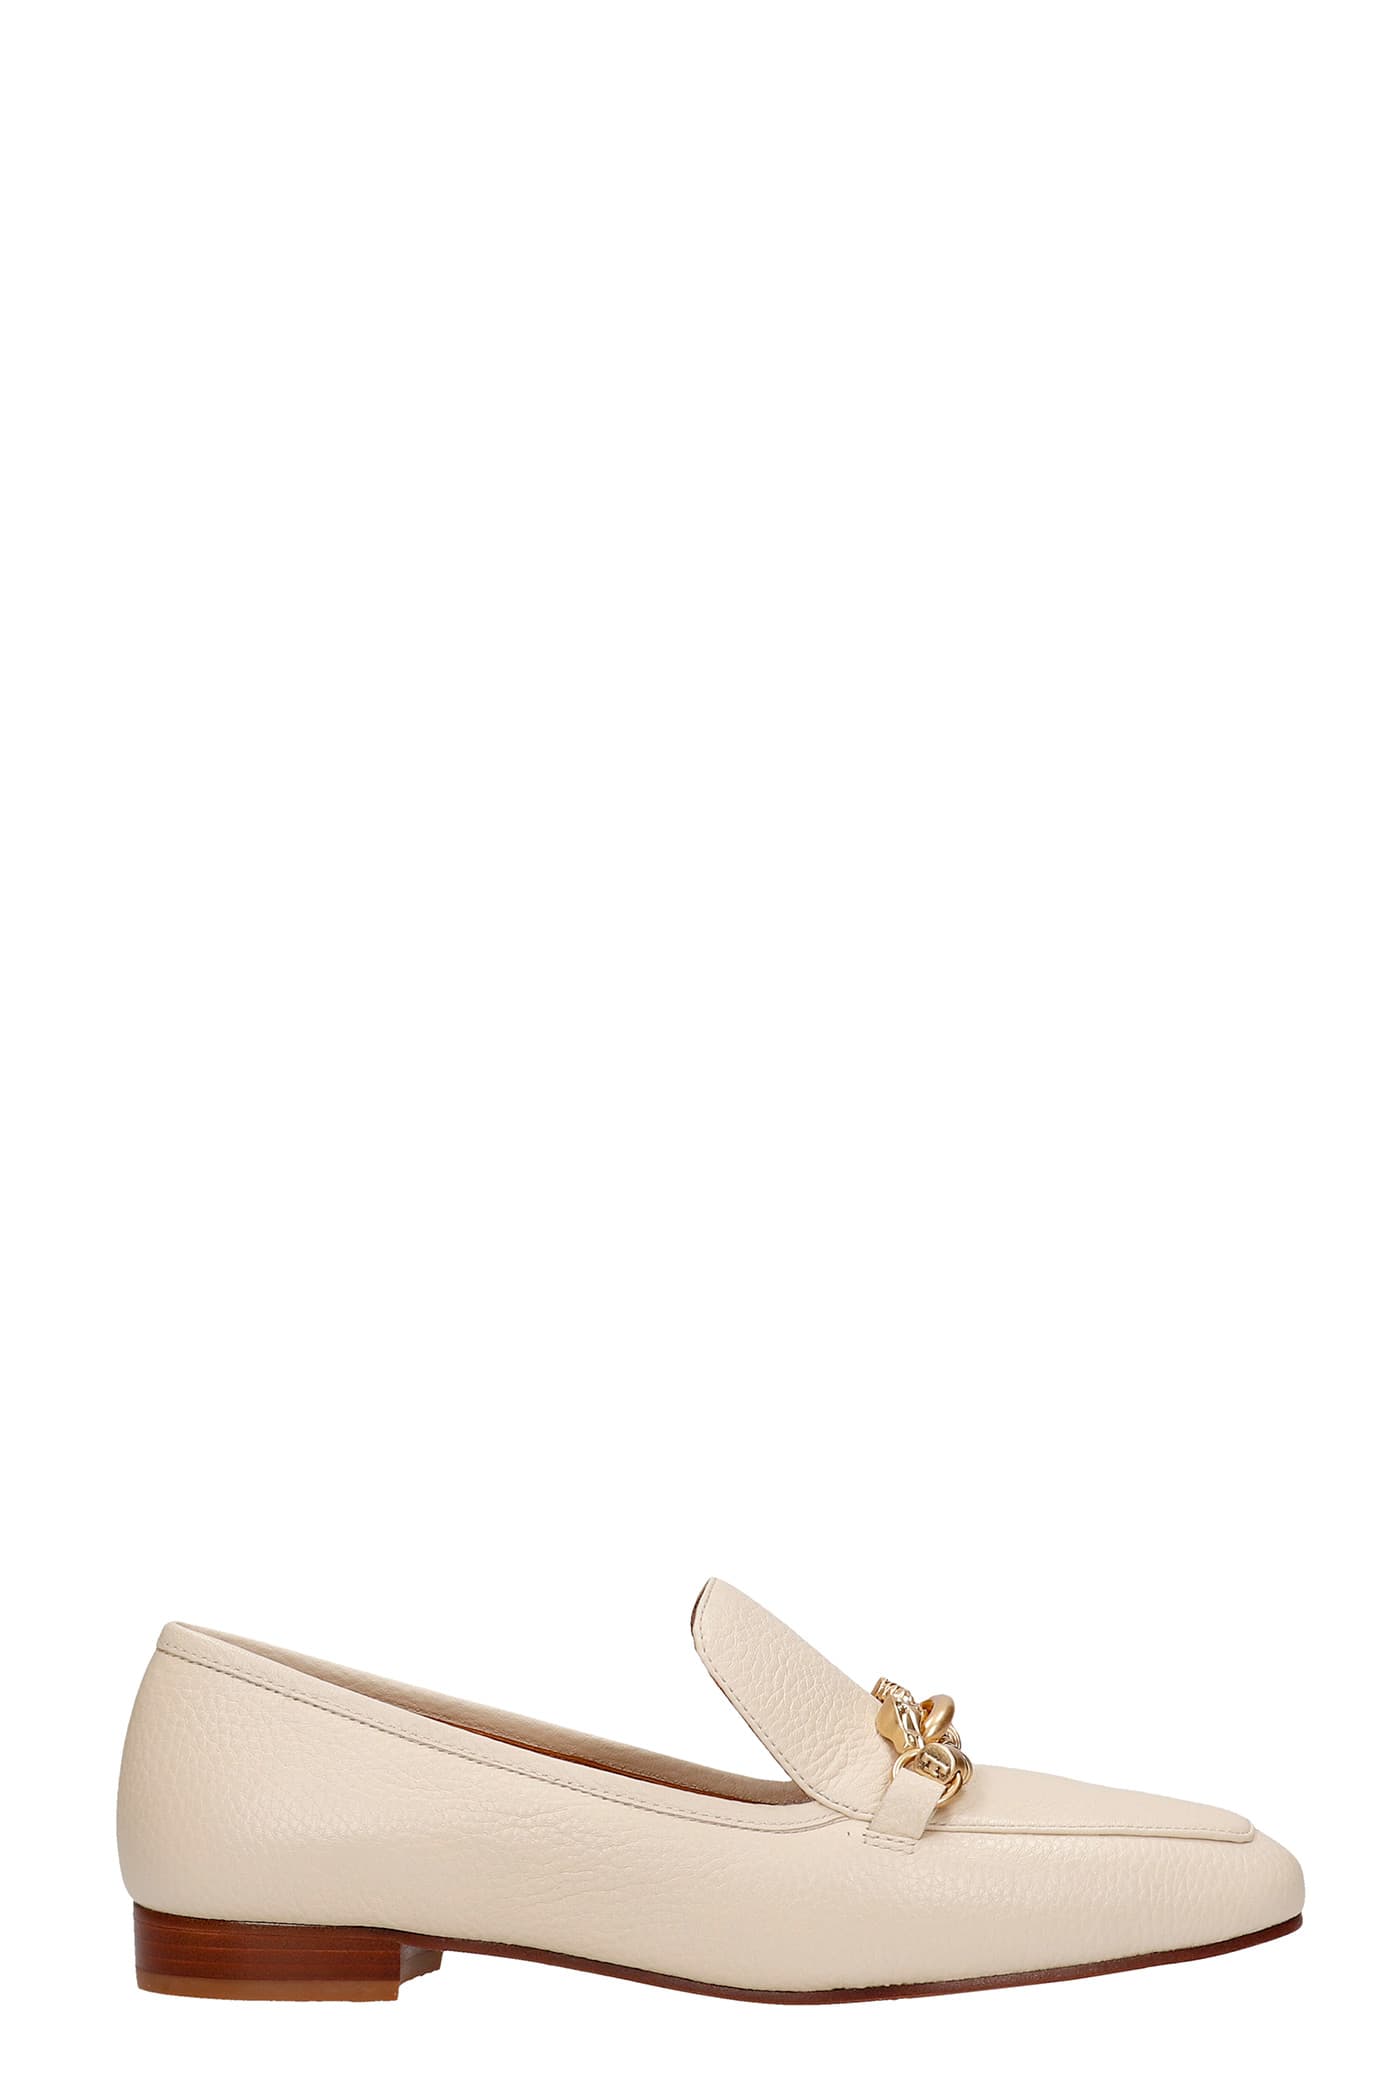 Tory Burch Jess Loafers In Beige Leather